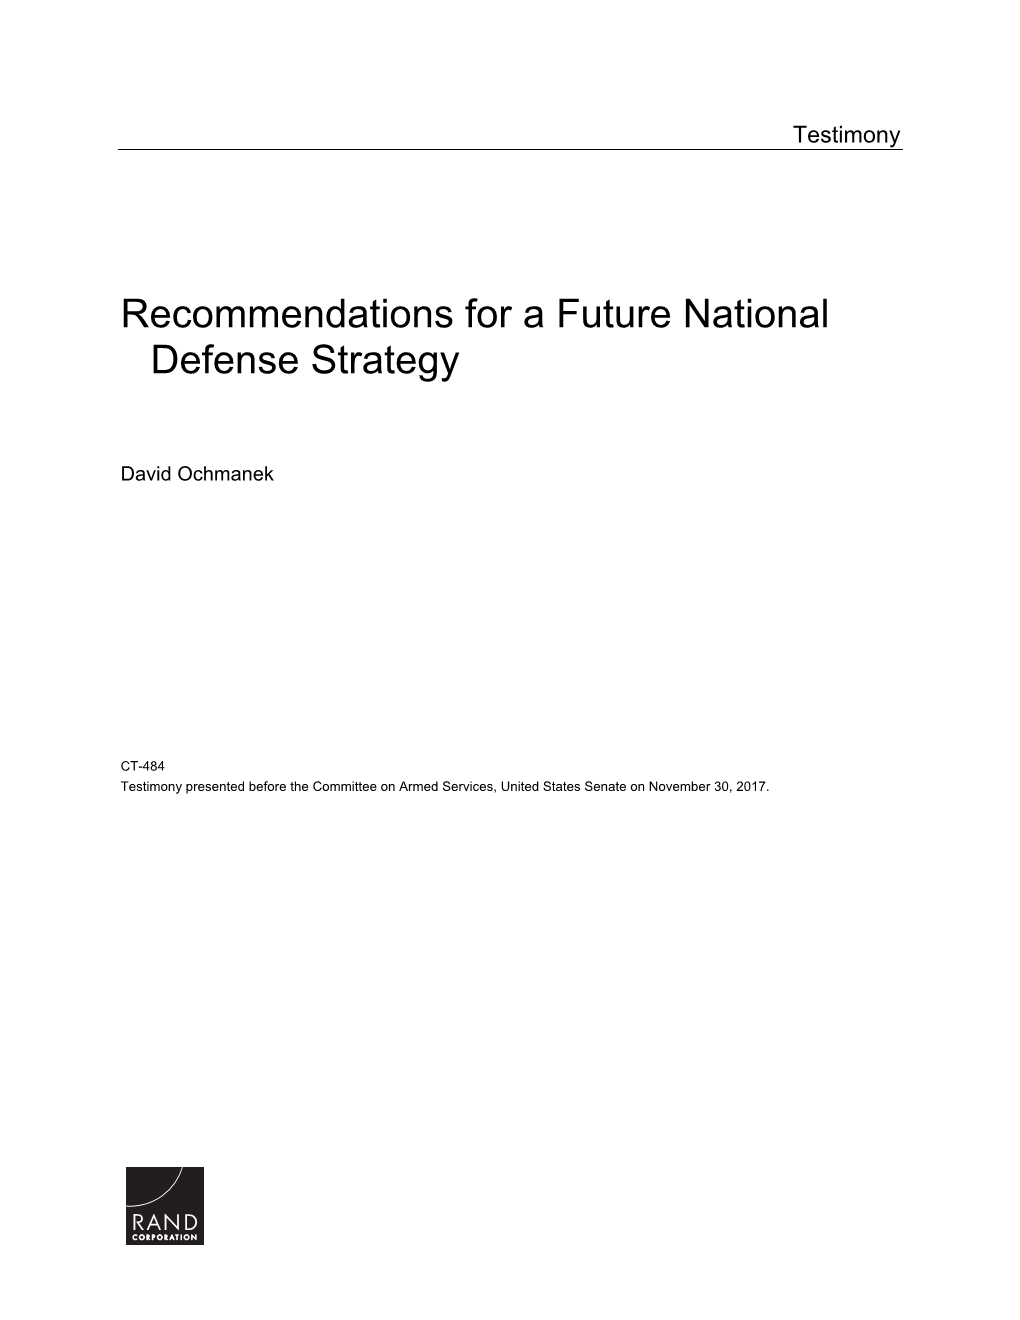 Recommendations for a Future National Defense Strategy